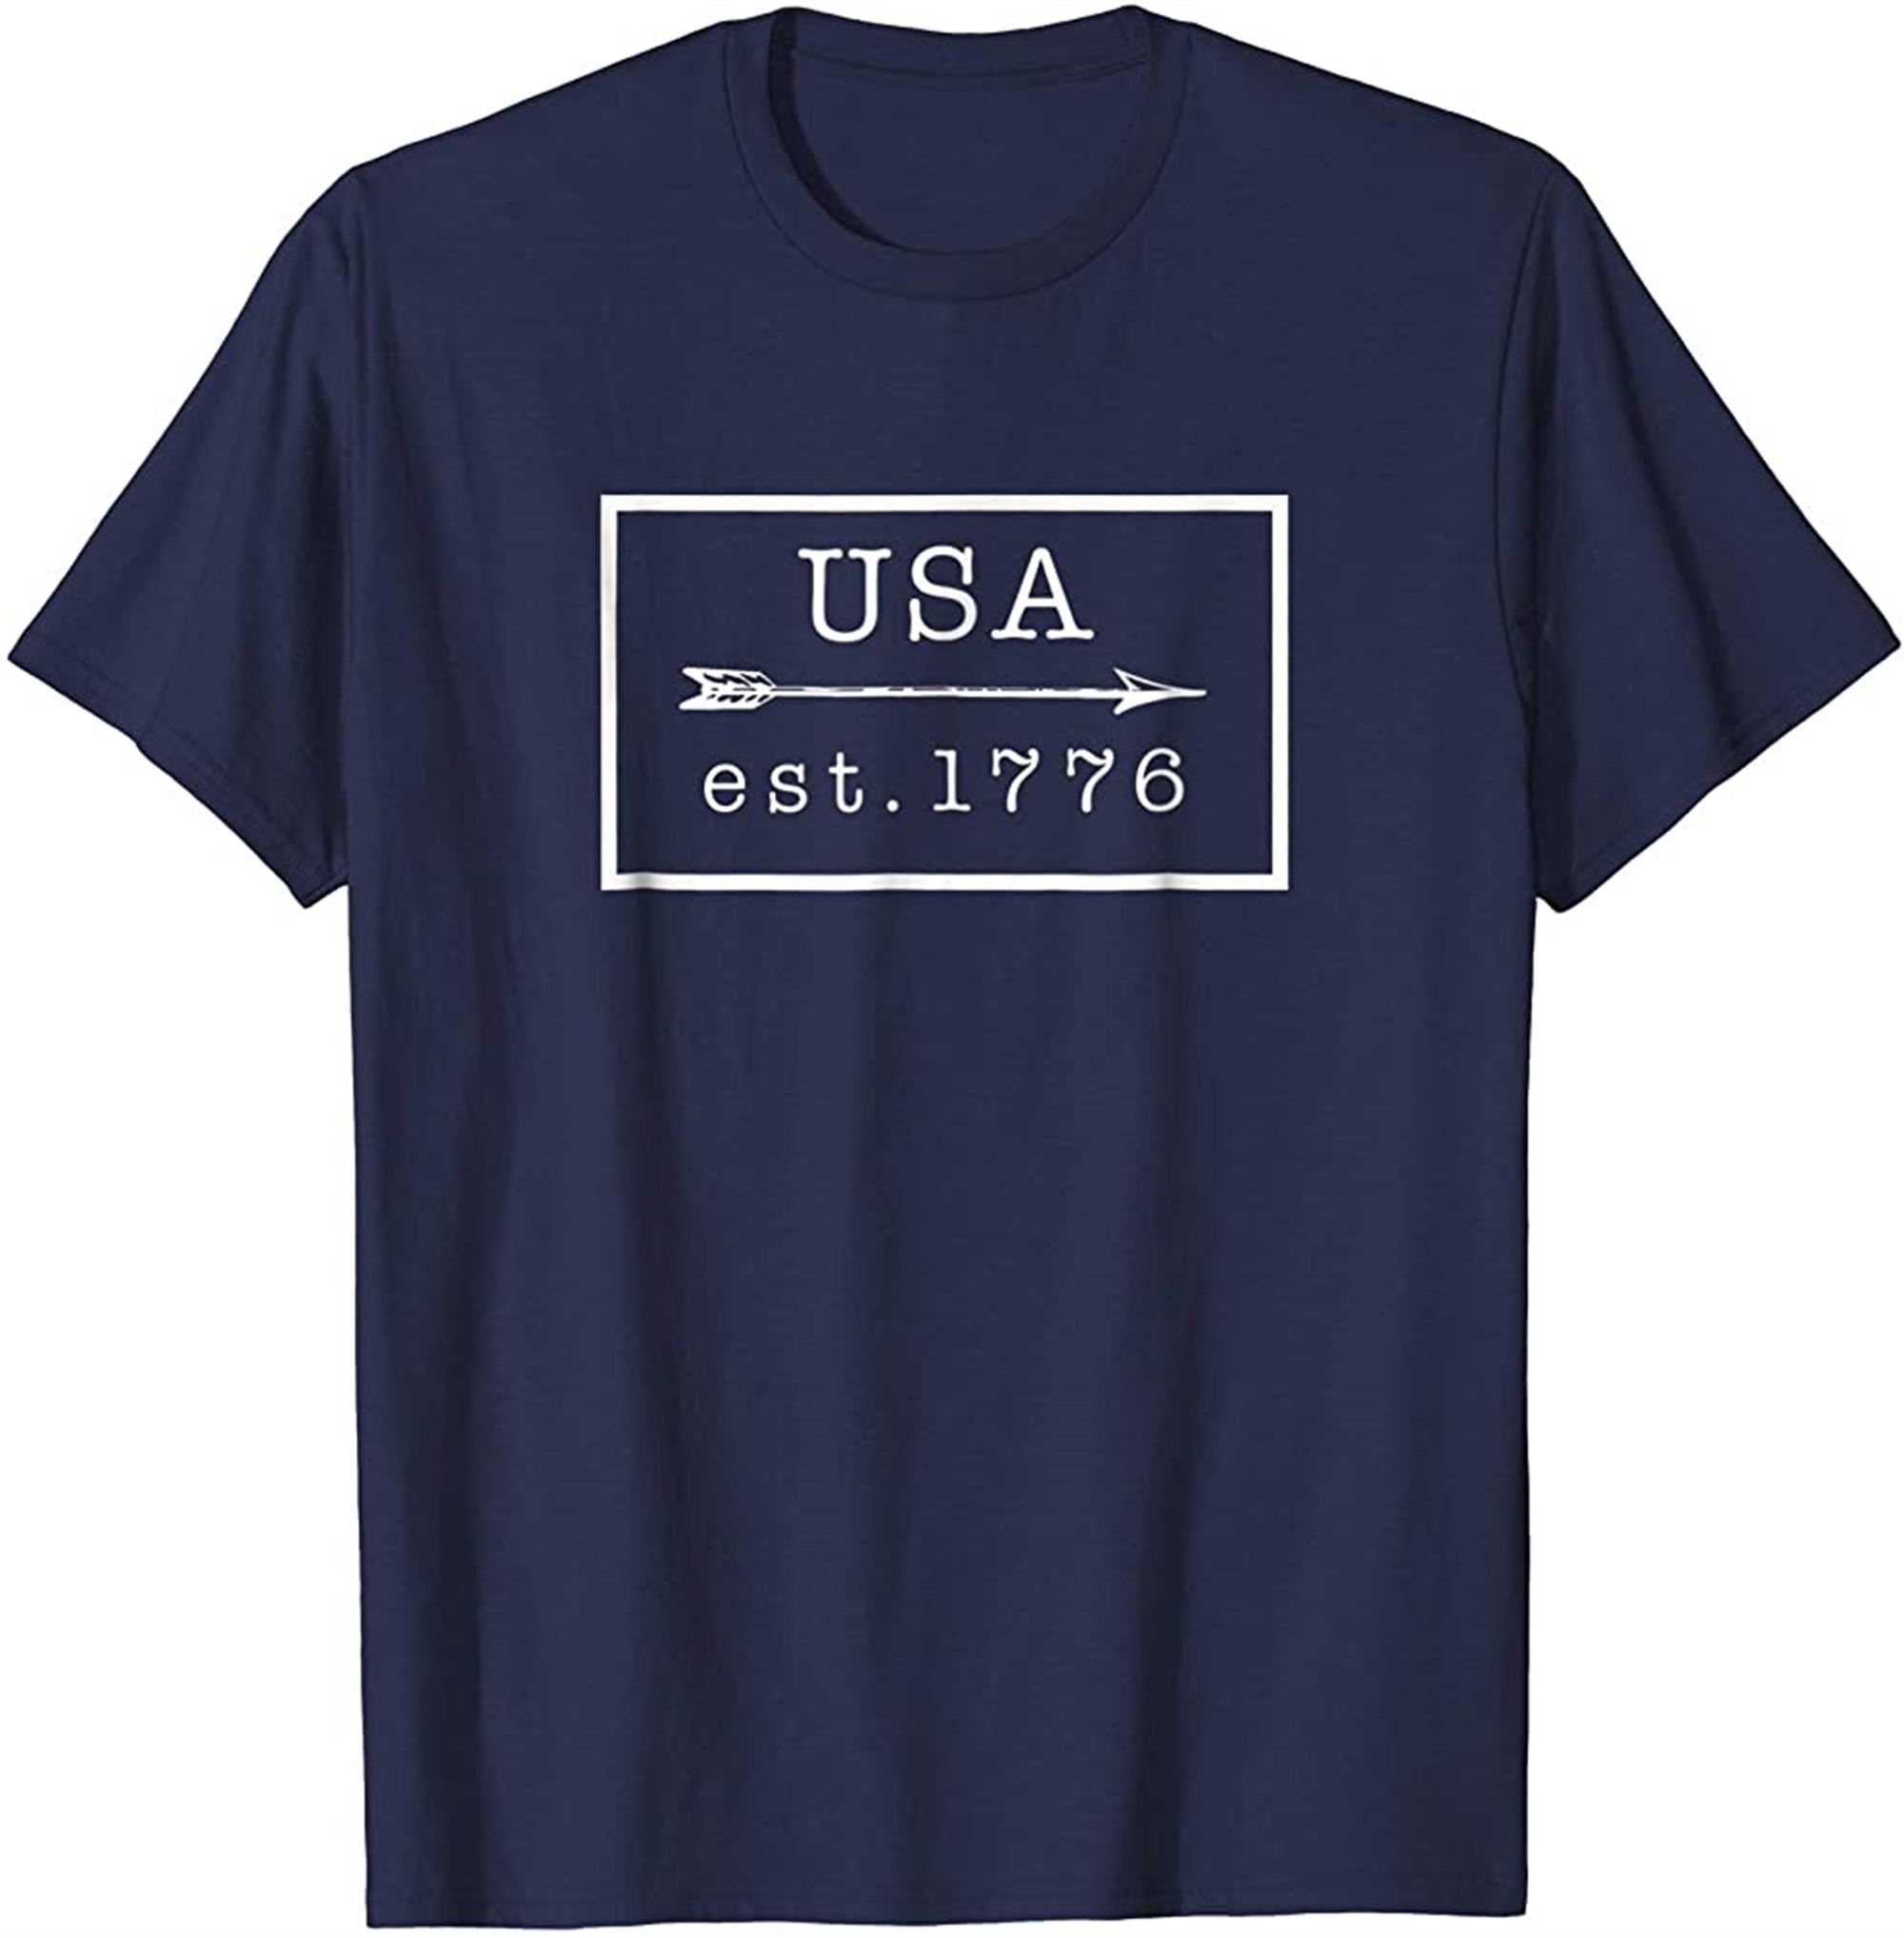 Usa Est 1776 Cool Patriotic Shirt For July 4th Plus Size Up To 5xl